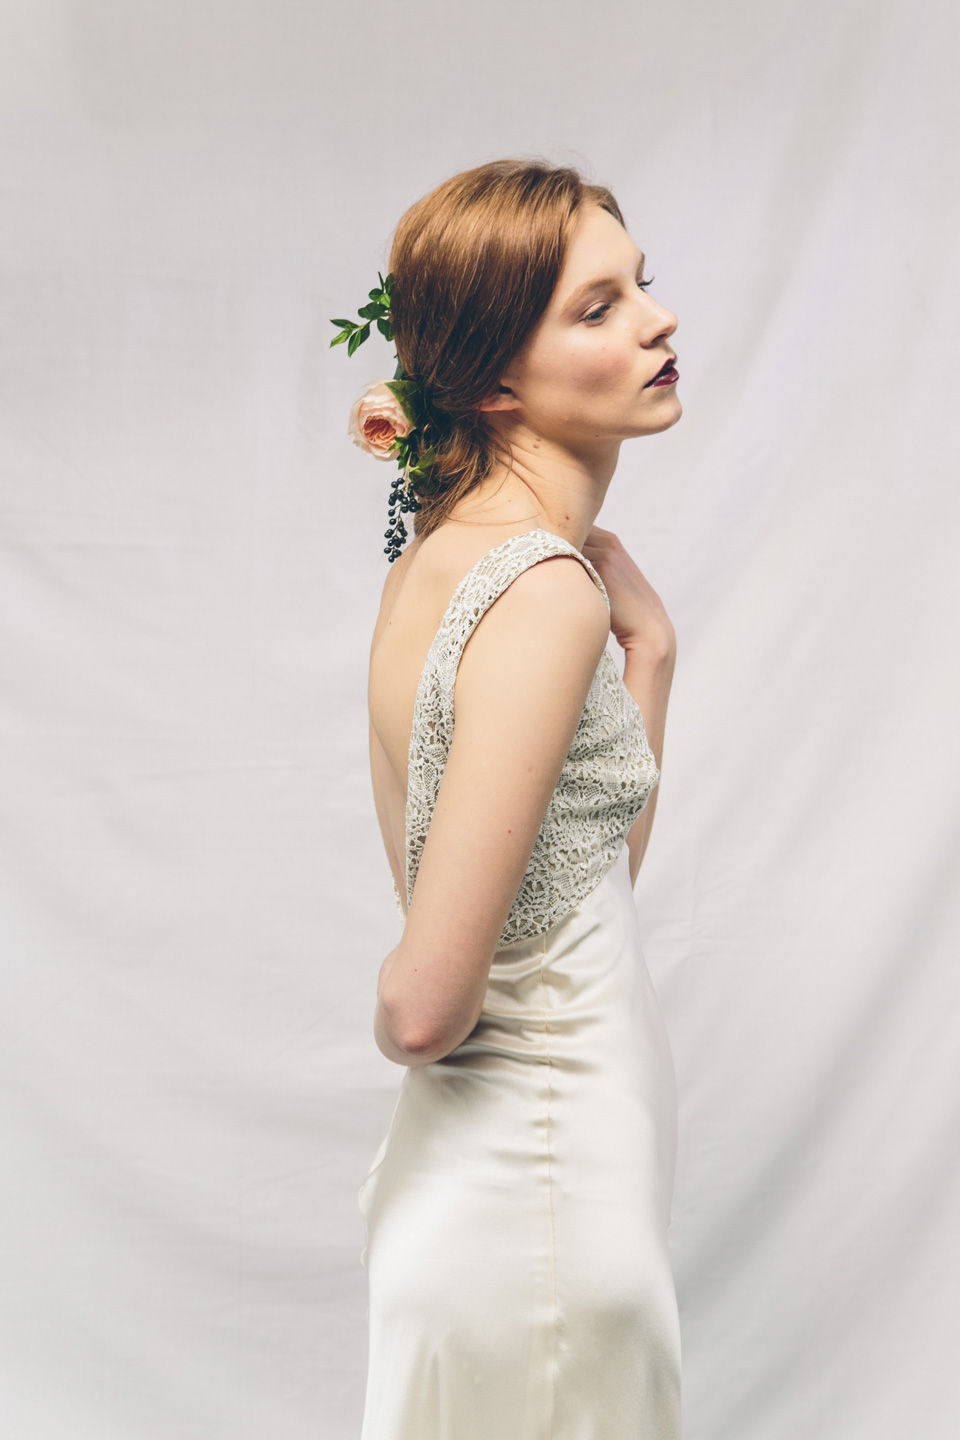 Kate Beaumont is a Sheffield based designer & Maker Of Elegant Wedding Gowns With A Vintage Twist. Visit kate-beaumont.co.uk.